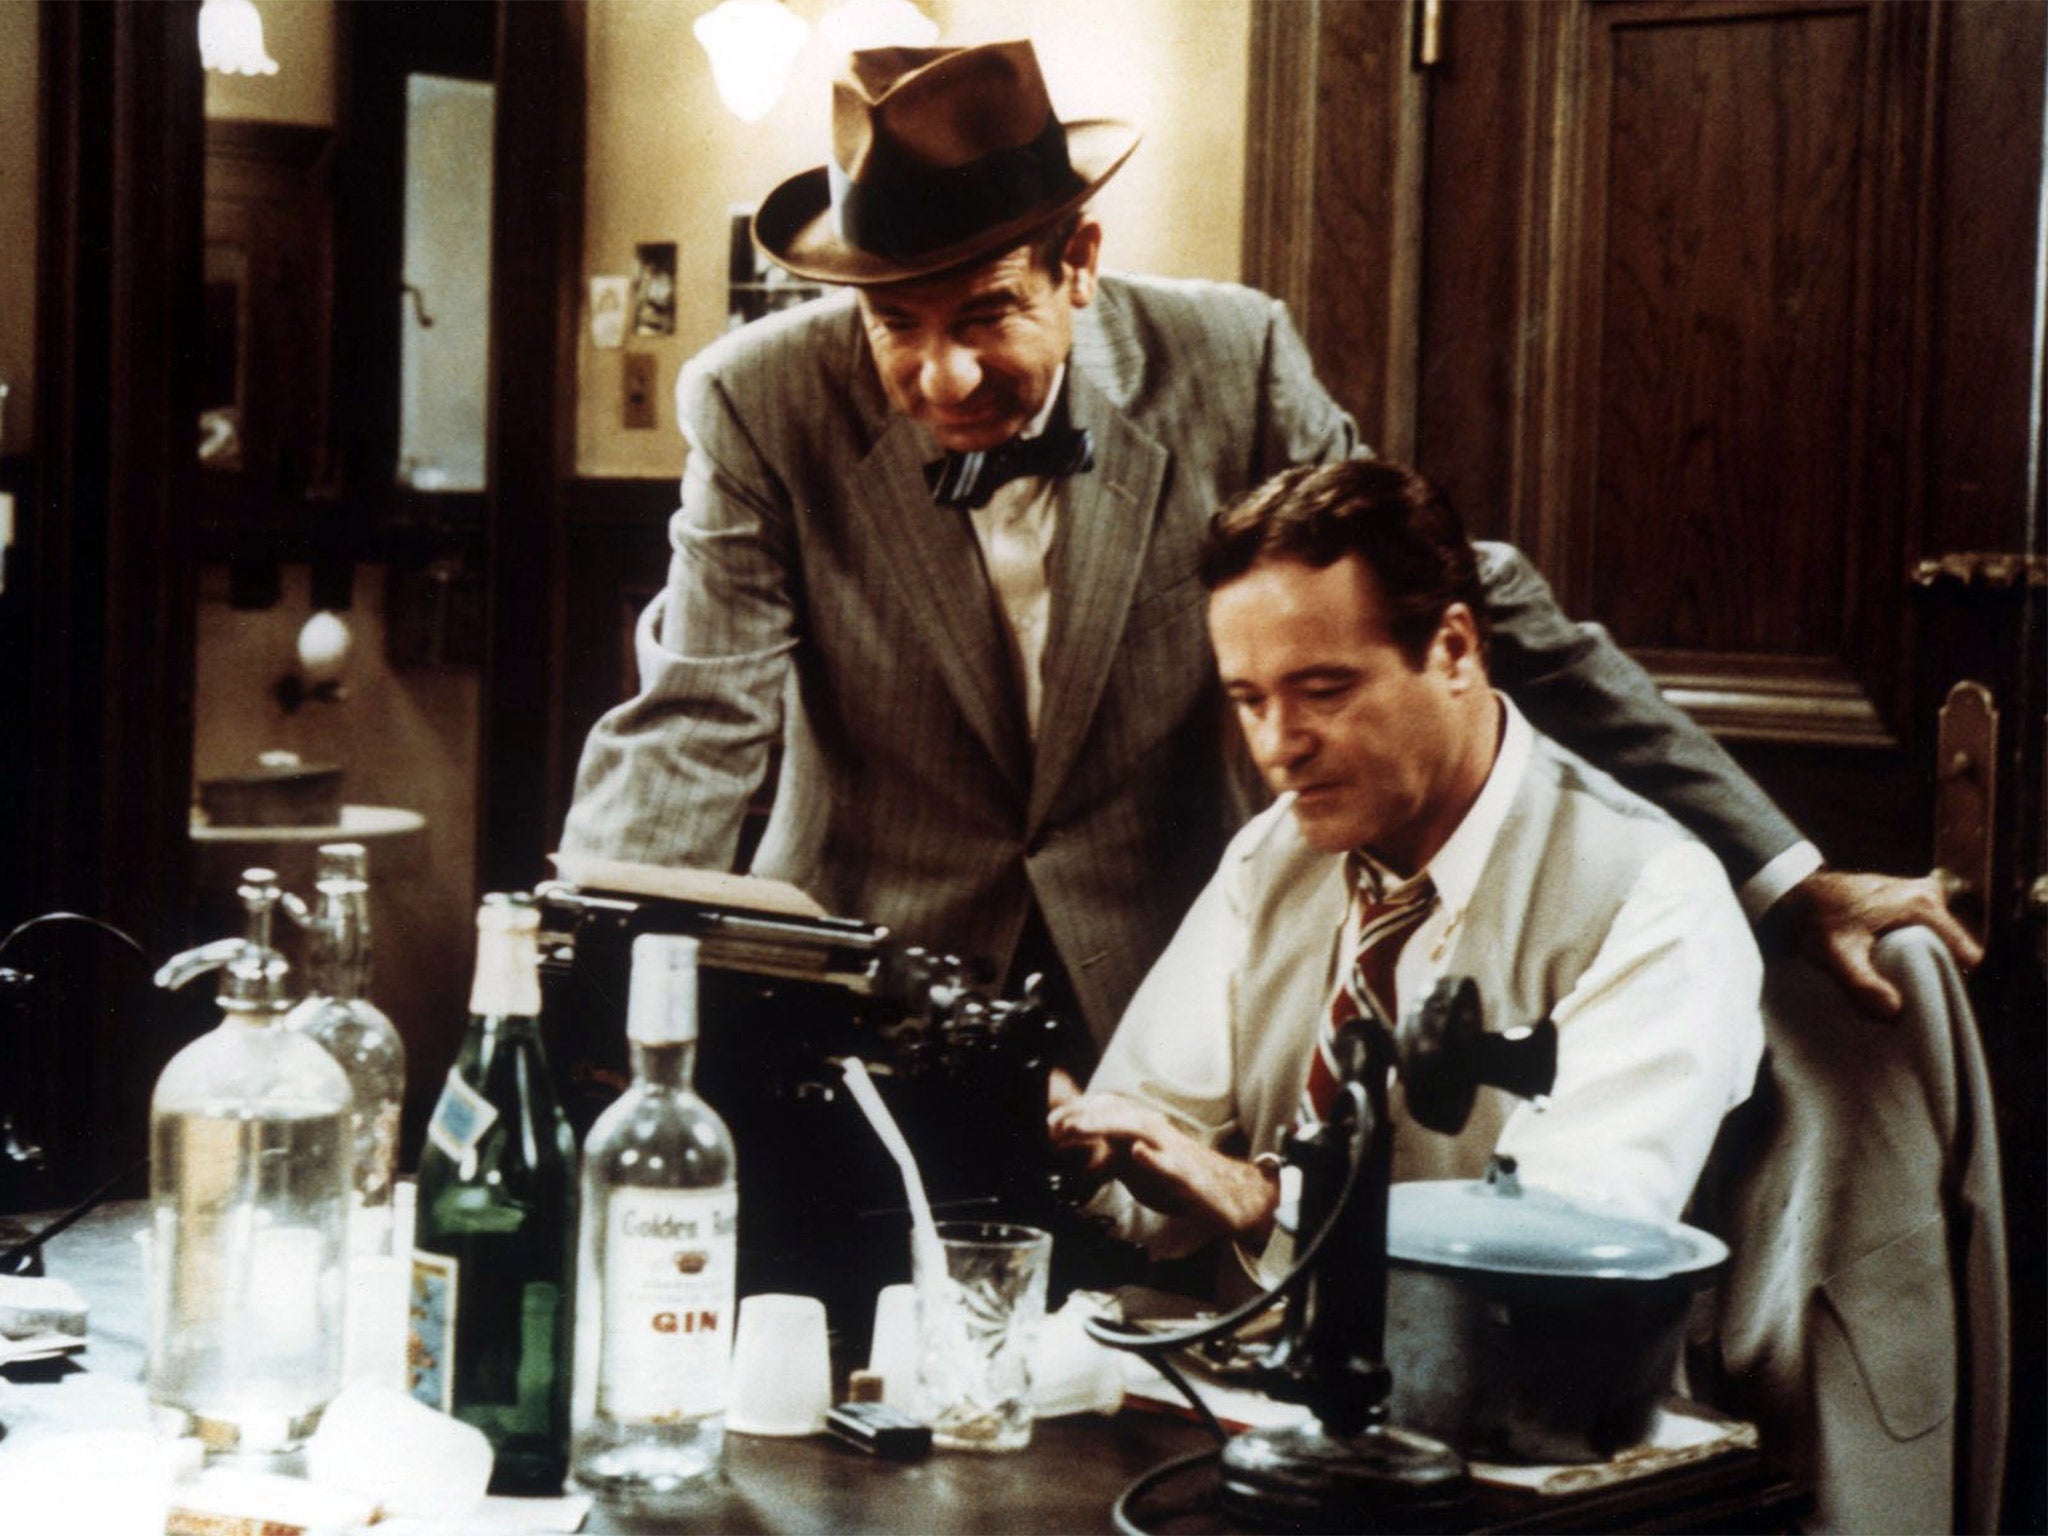 Walter Matthau and Jack Lemmon in ‘The Front Page’, using an old tech typewriter